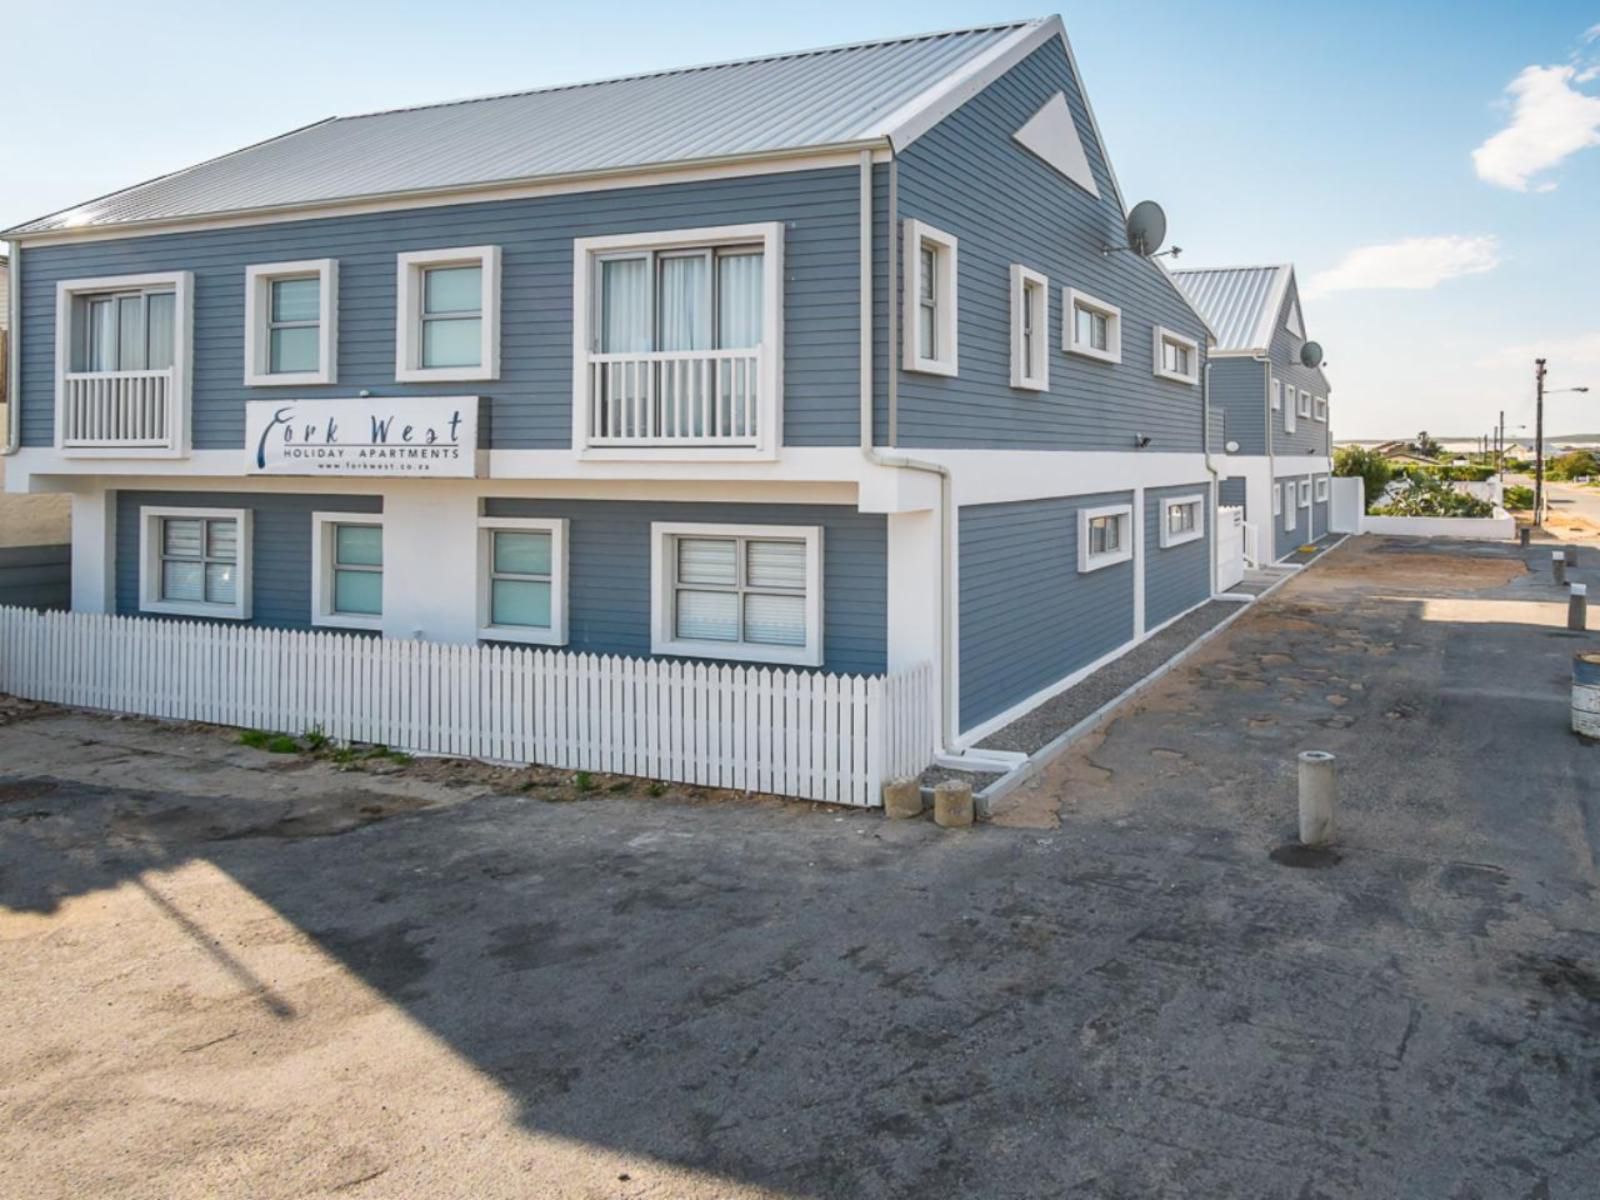 Fork West Holiday Apartments Elands Bay Western Cape South Africa House, Building, Architecture, Window